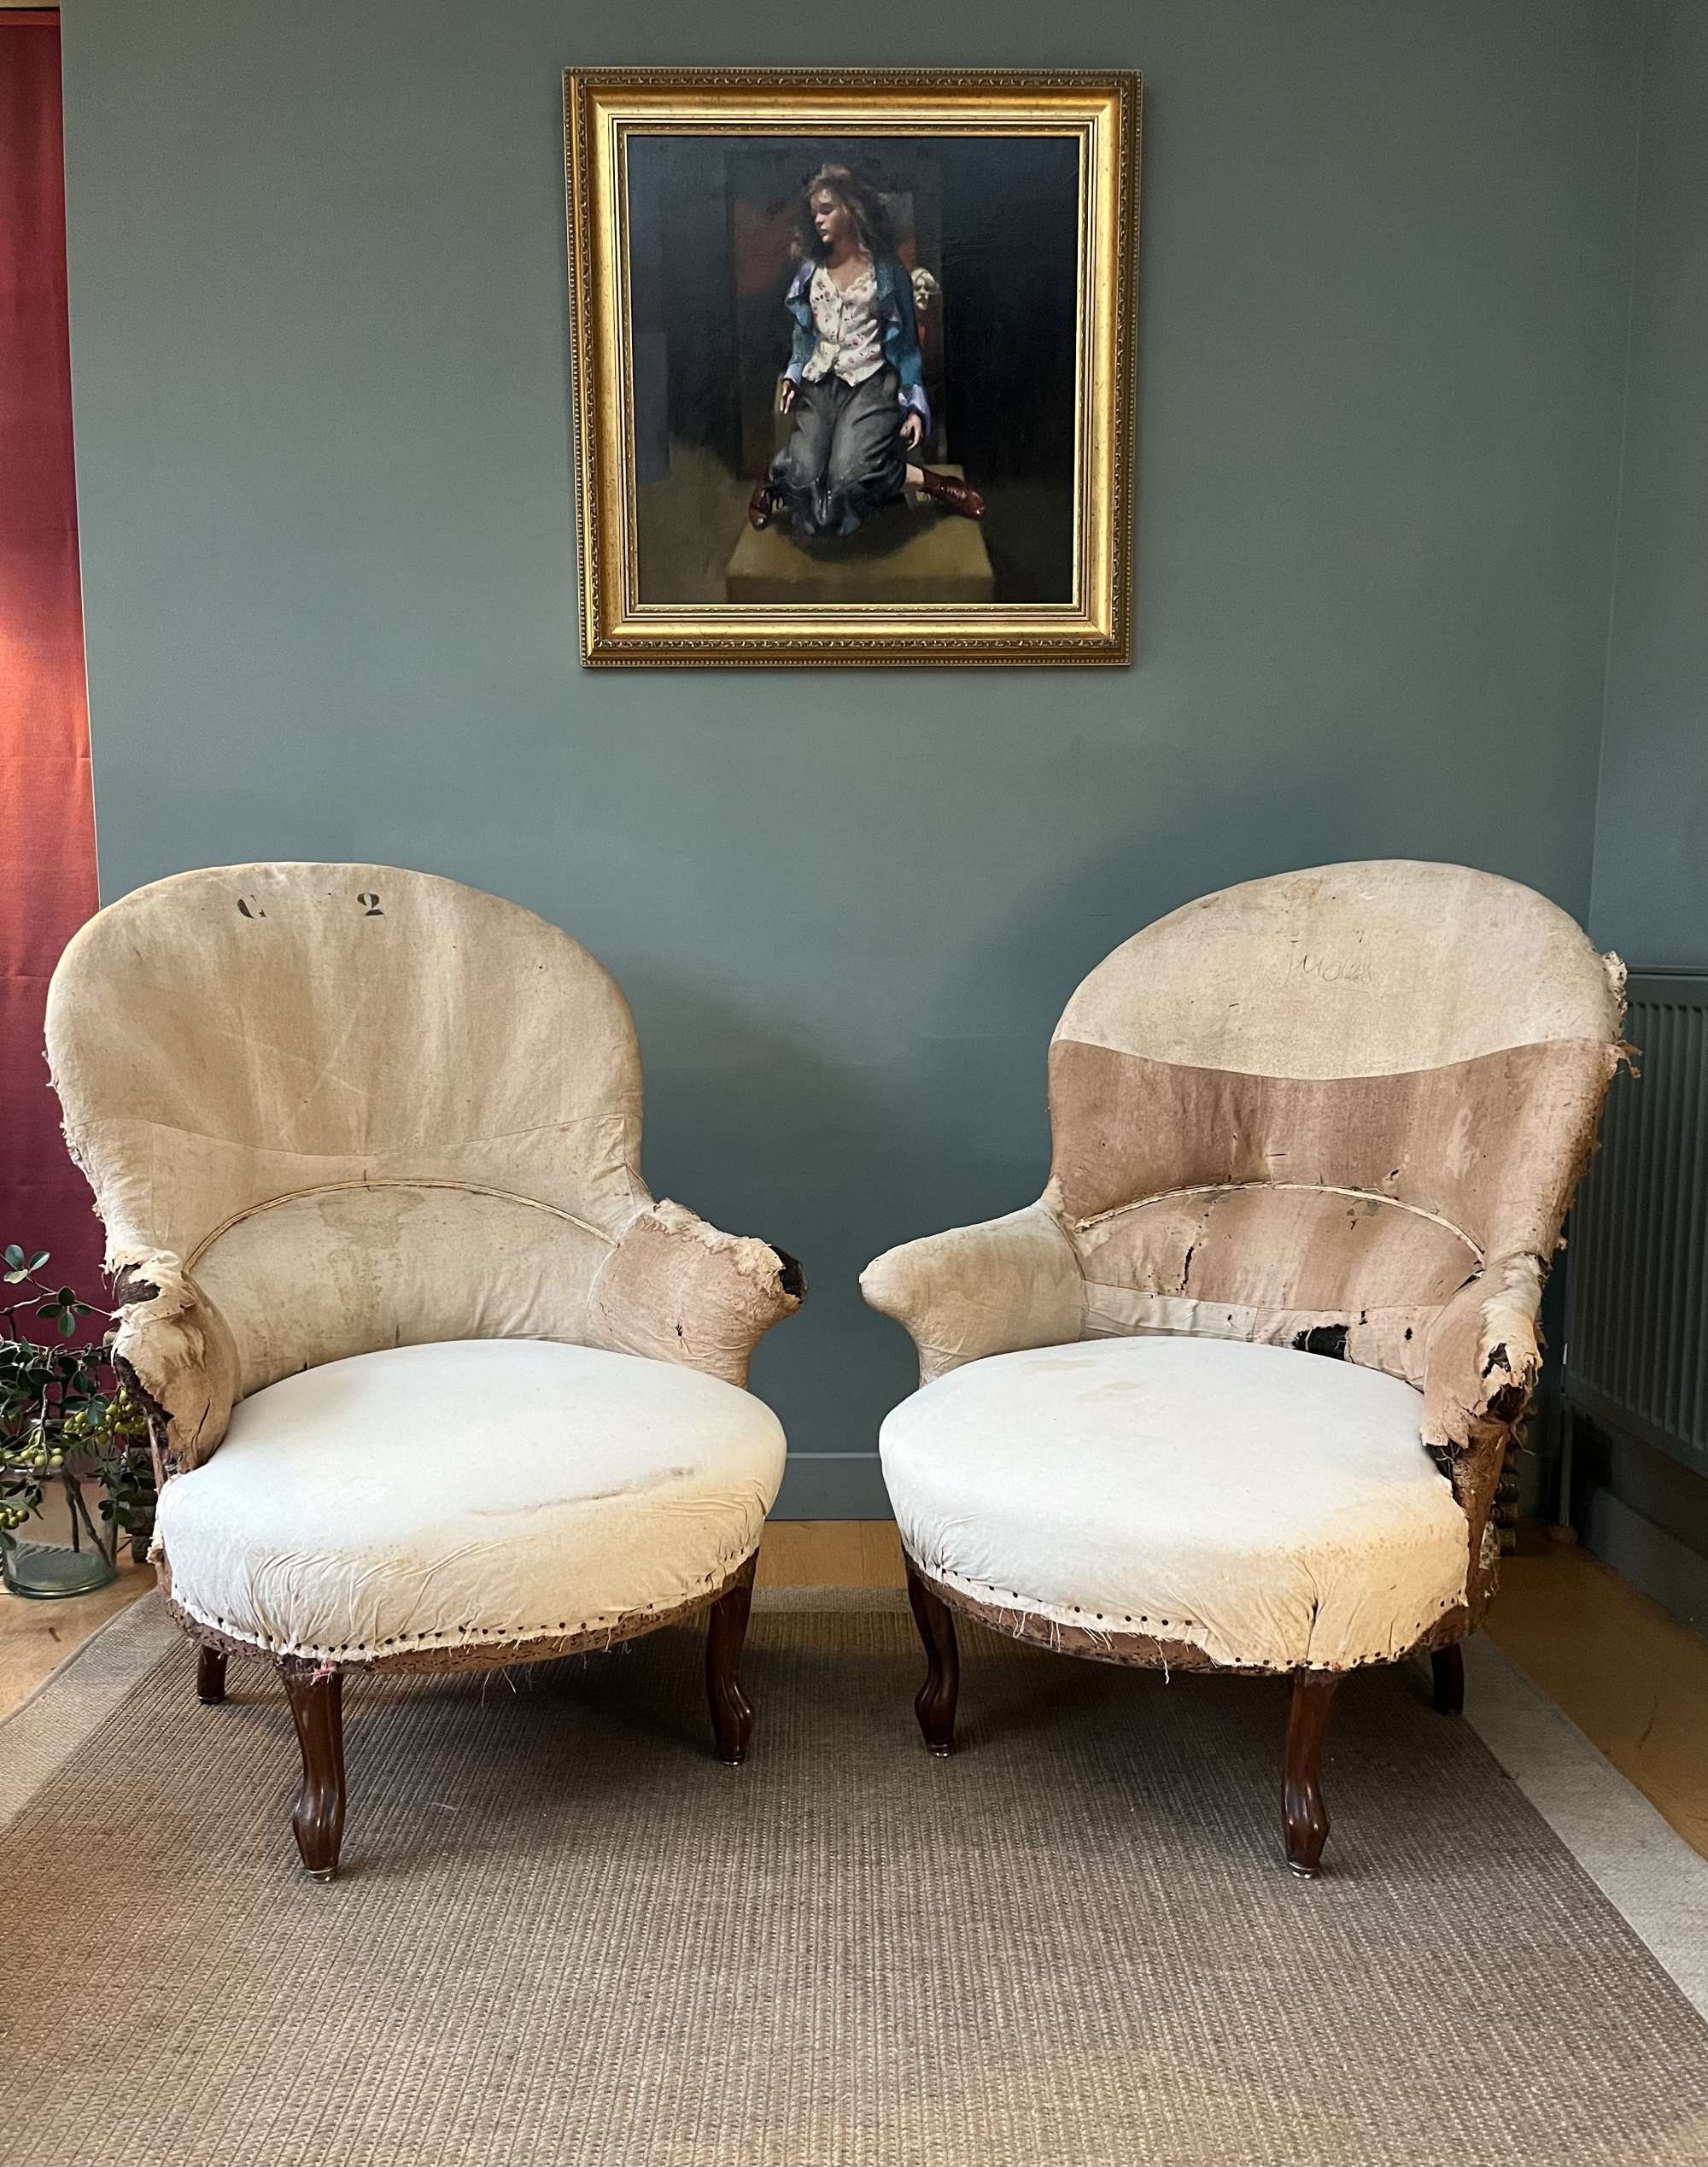 Pair Of Antique French Napoleon Iii Chairs (for Reupholstery)